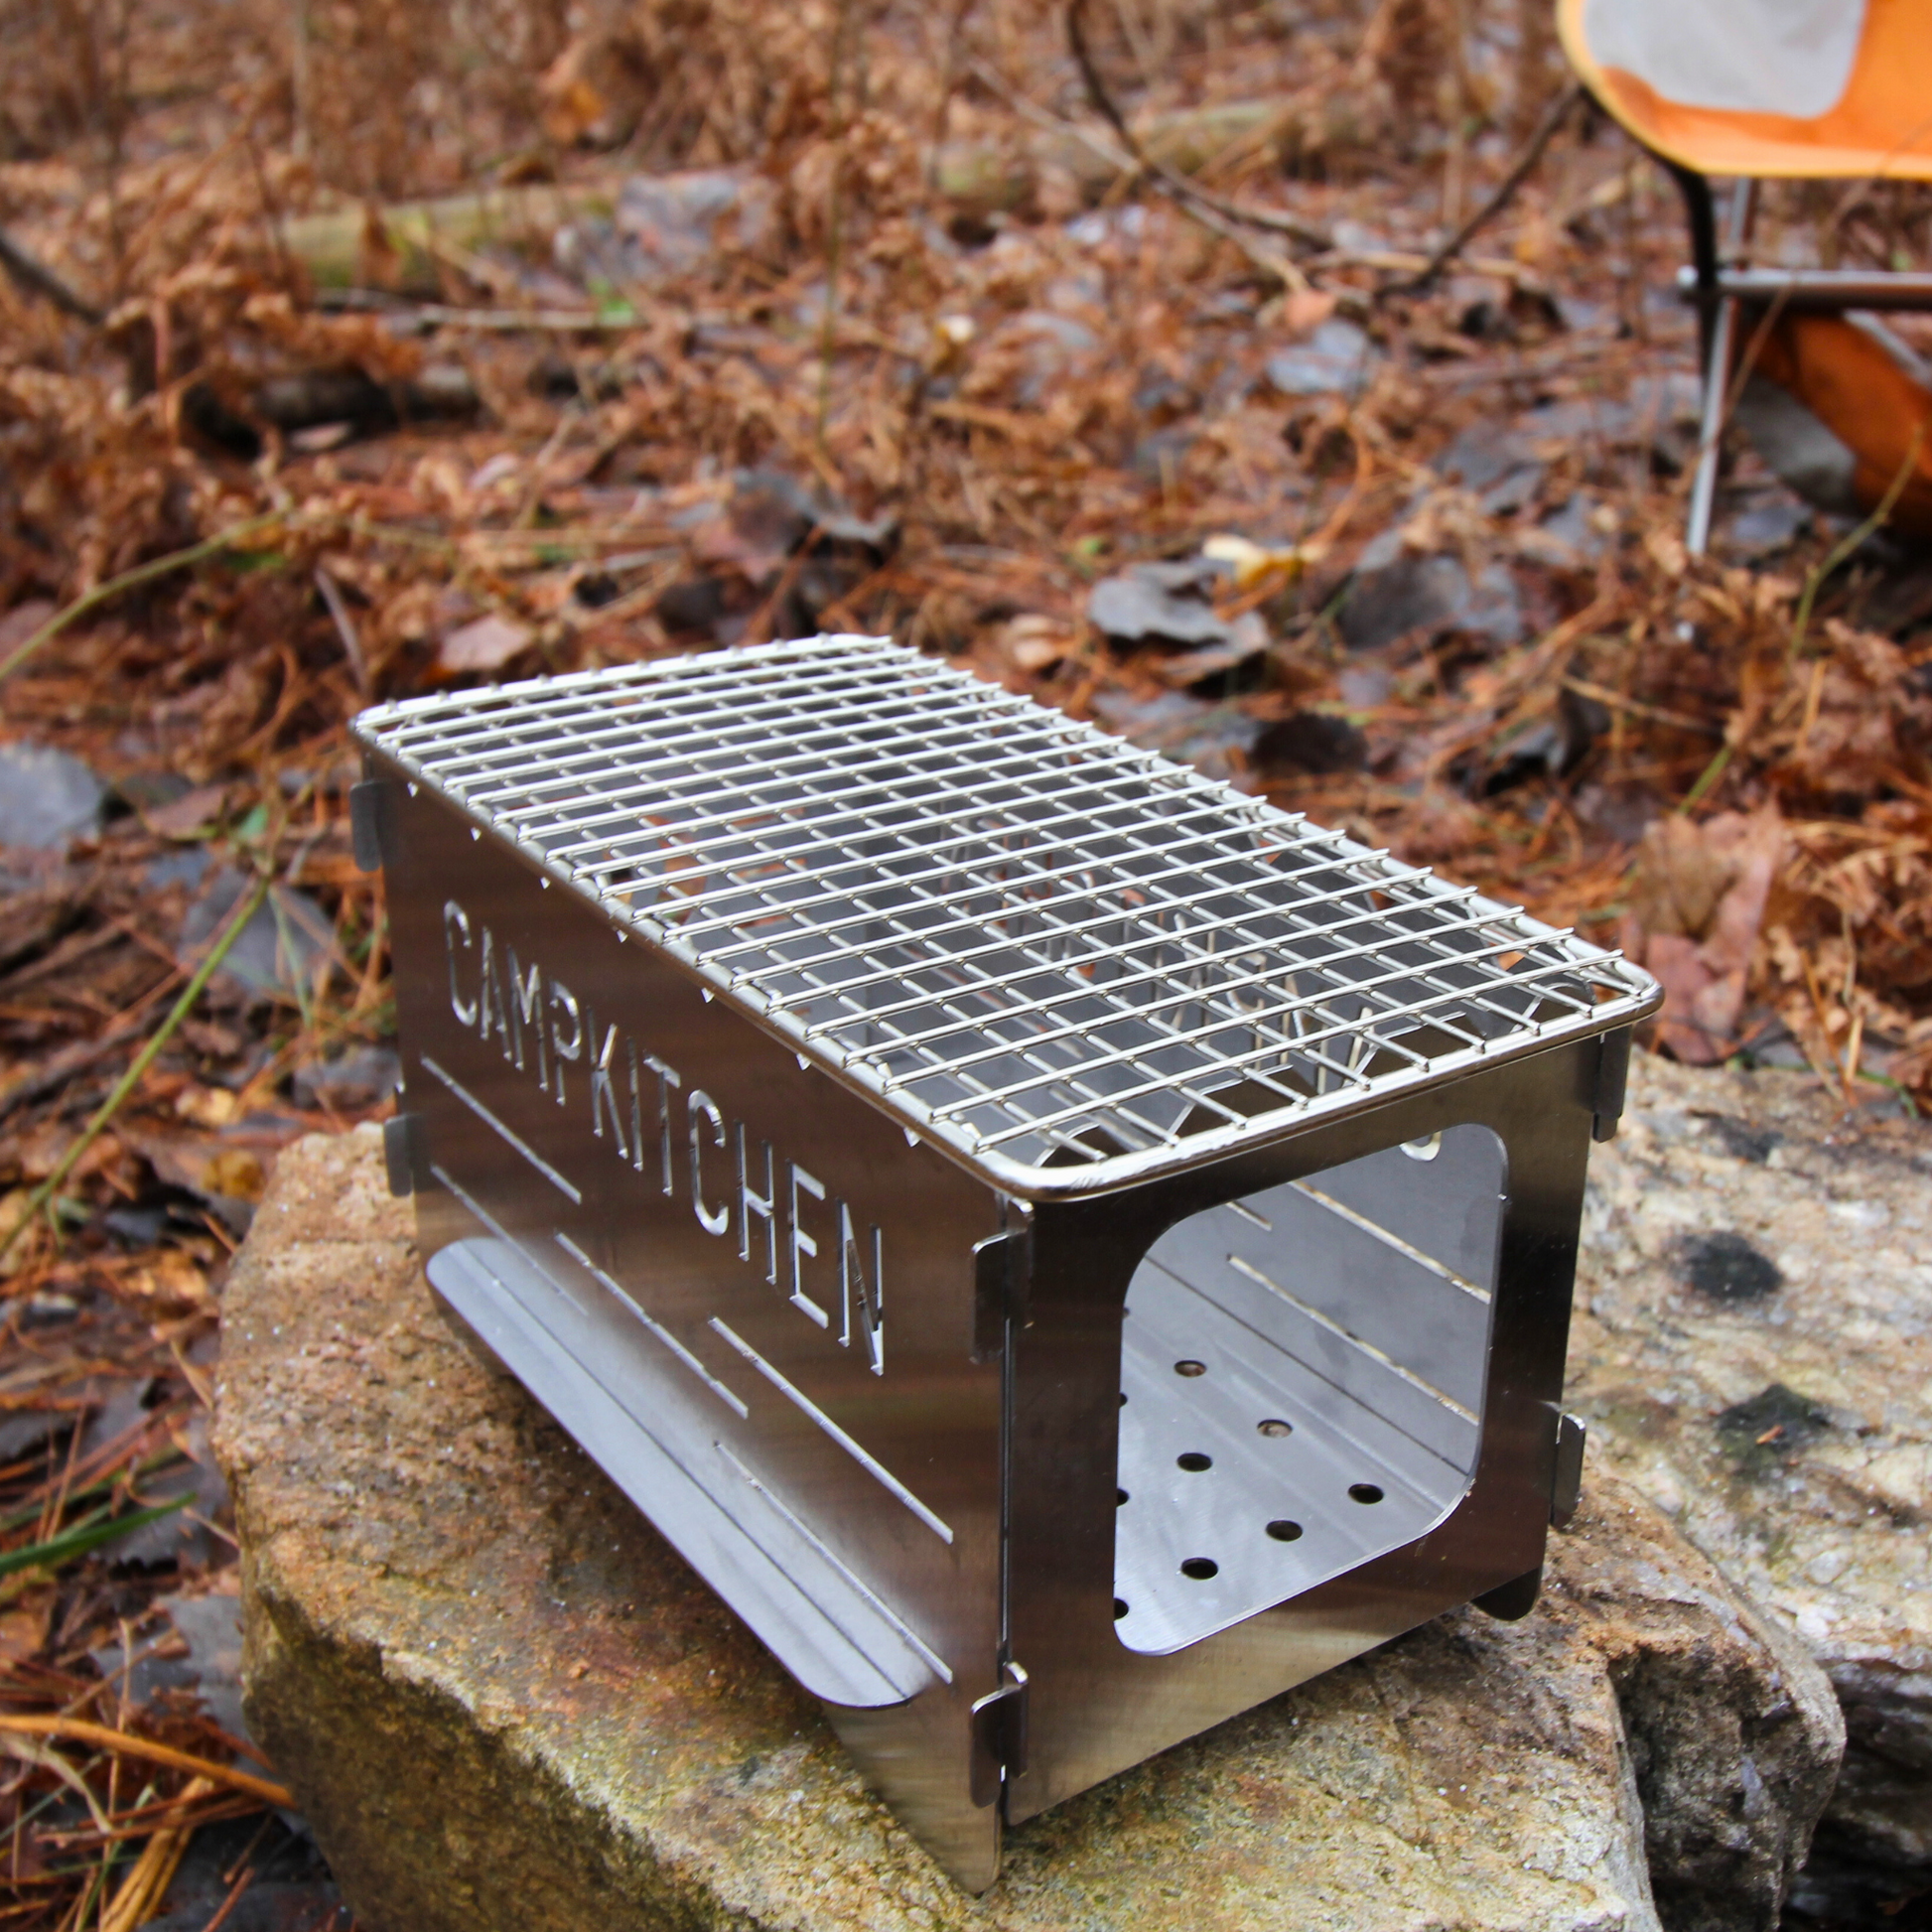 CAMPKITCHEN Twig Stove. Stove is on an angle showcasing an open end which is used to fuel the fire with twigs and small pieces of wood.